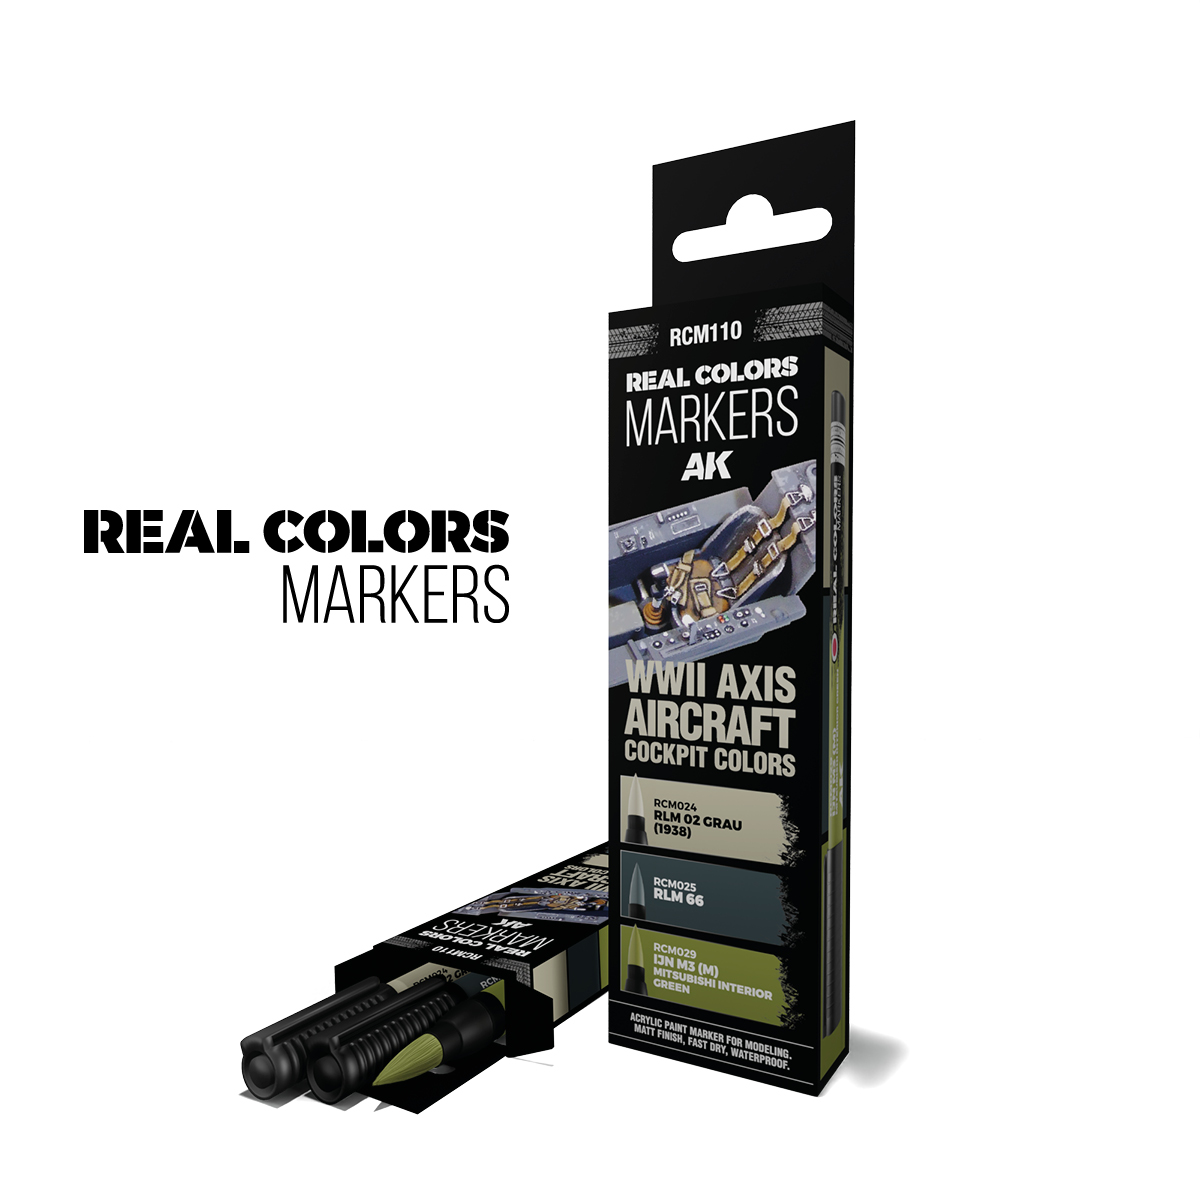 WWII AXIS AIRCRAFT COCKPIT COLORS – RC MARKERS SET